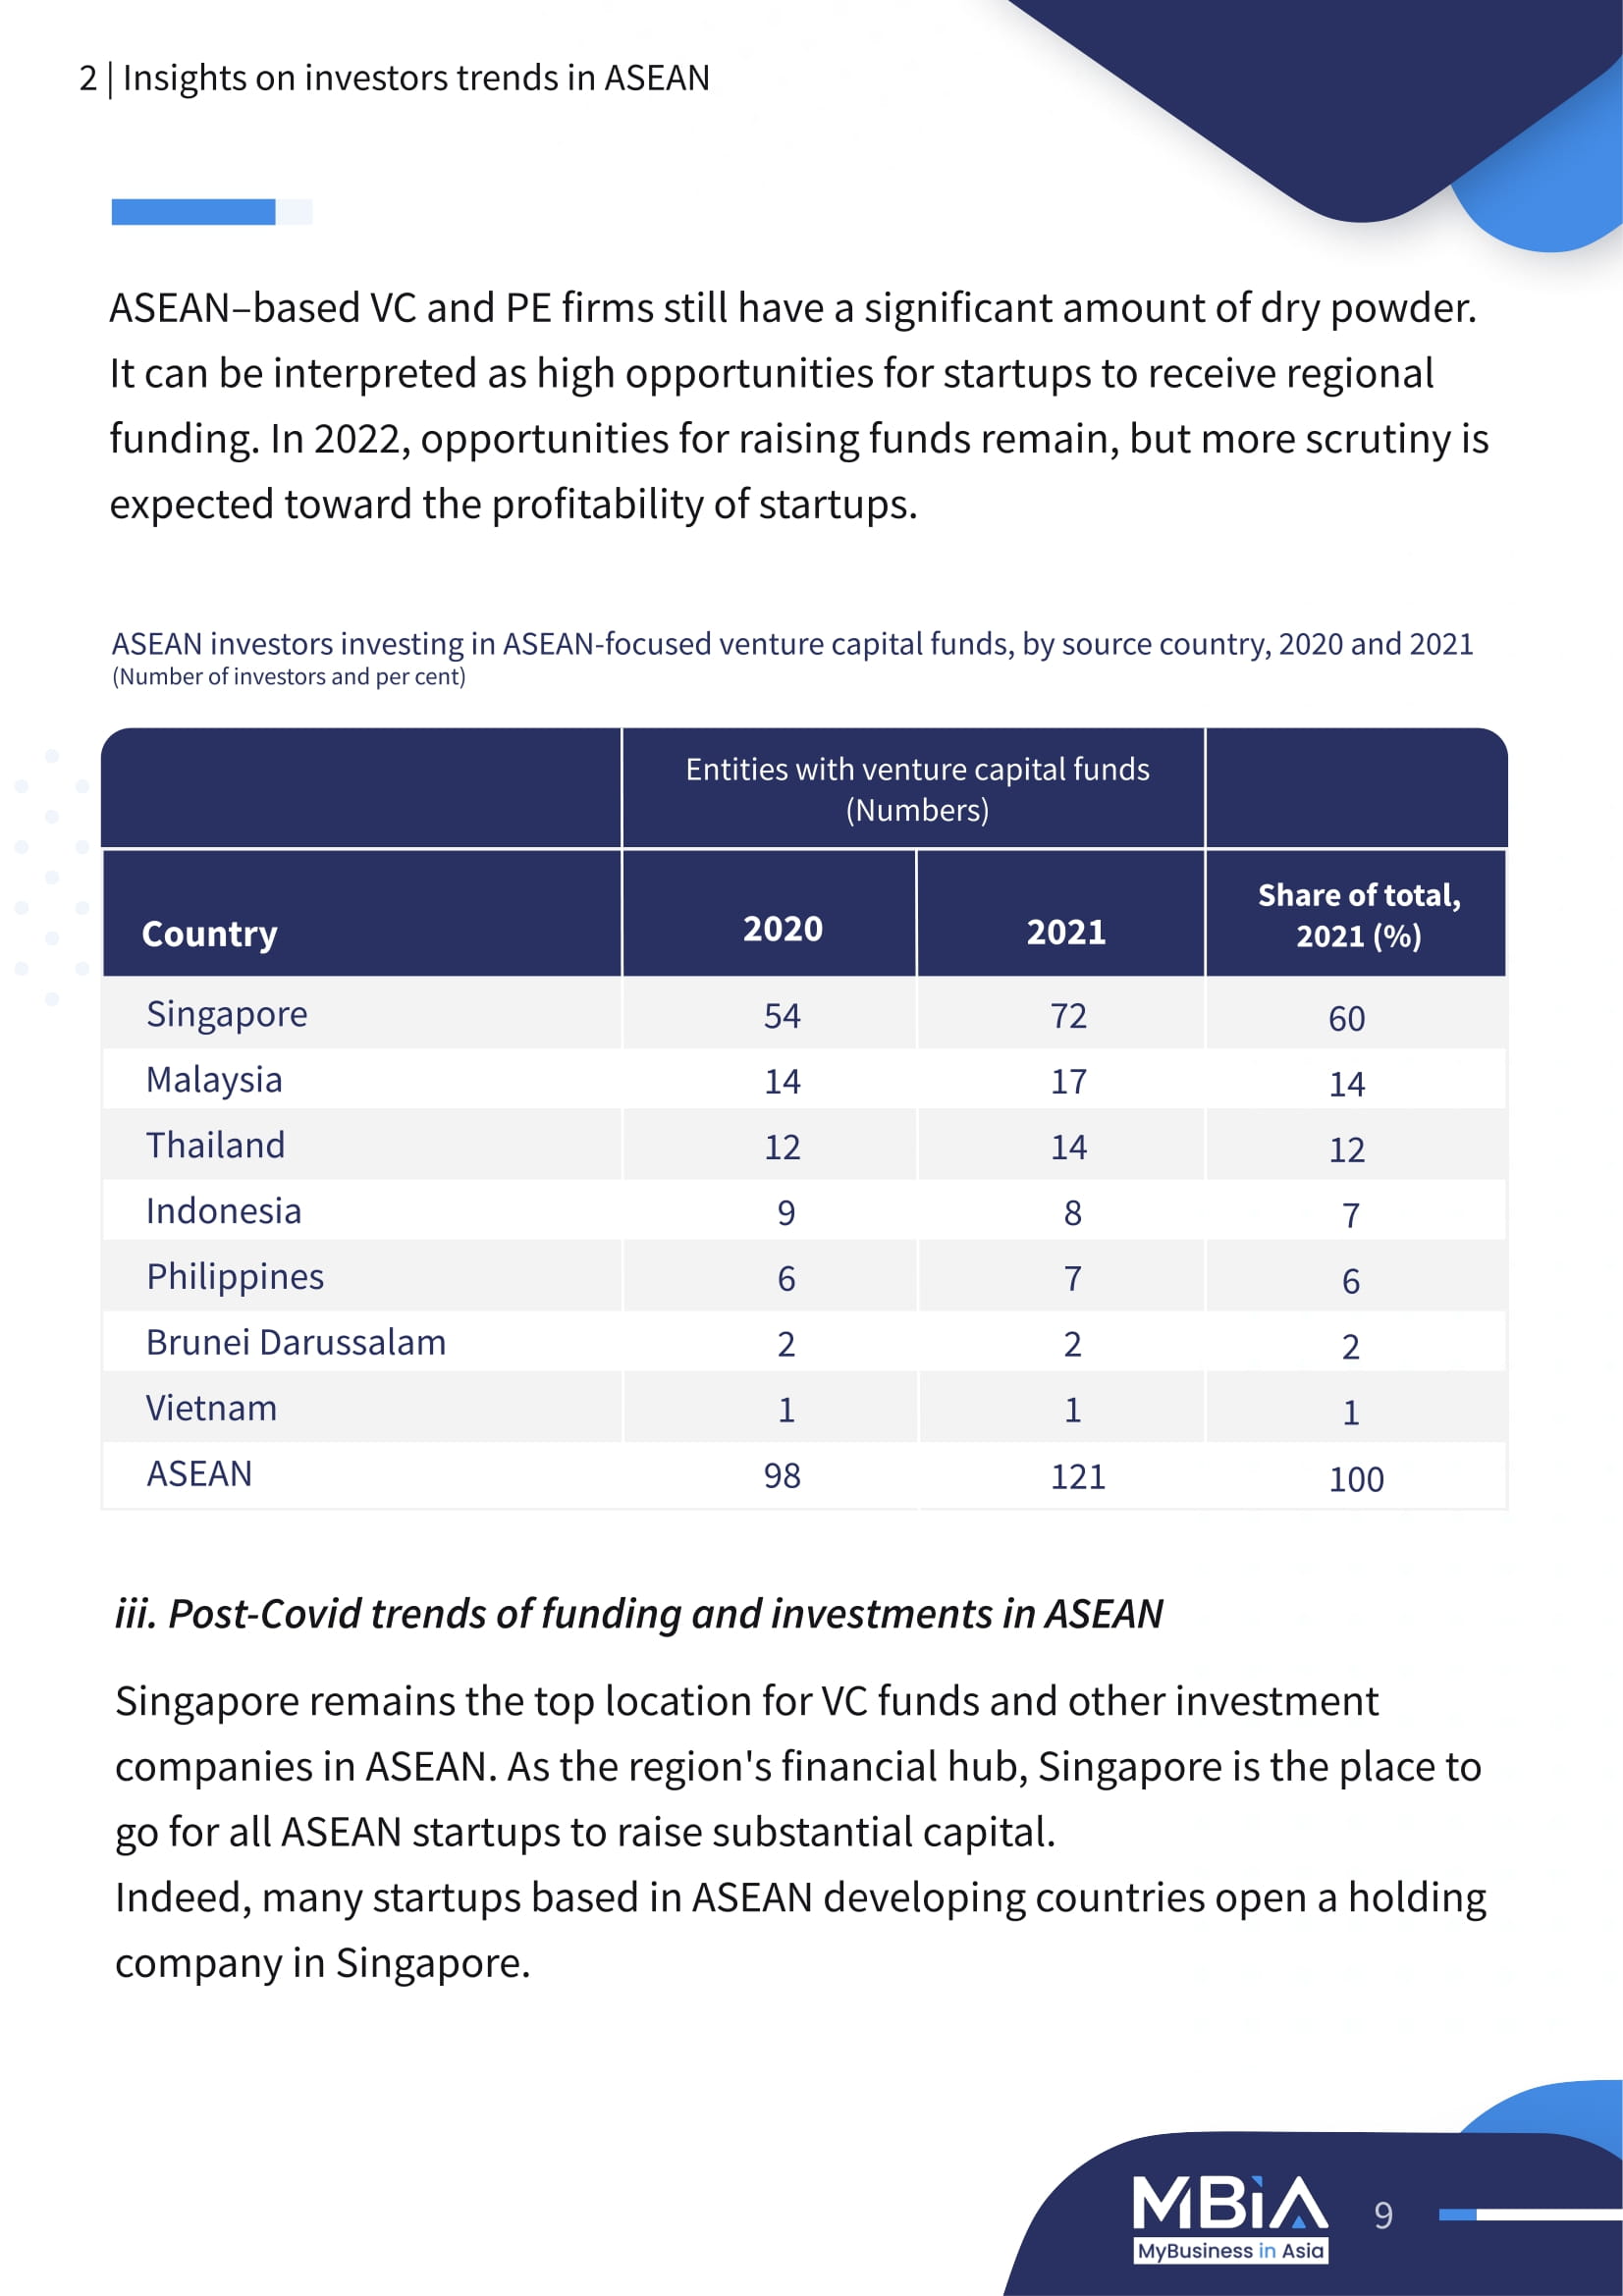 Investment Structuring and Fund Raising in ASEAN - Complete guide